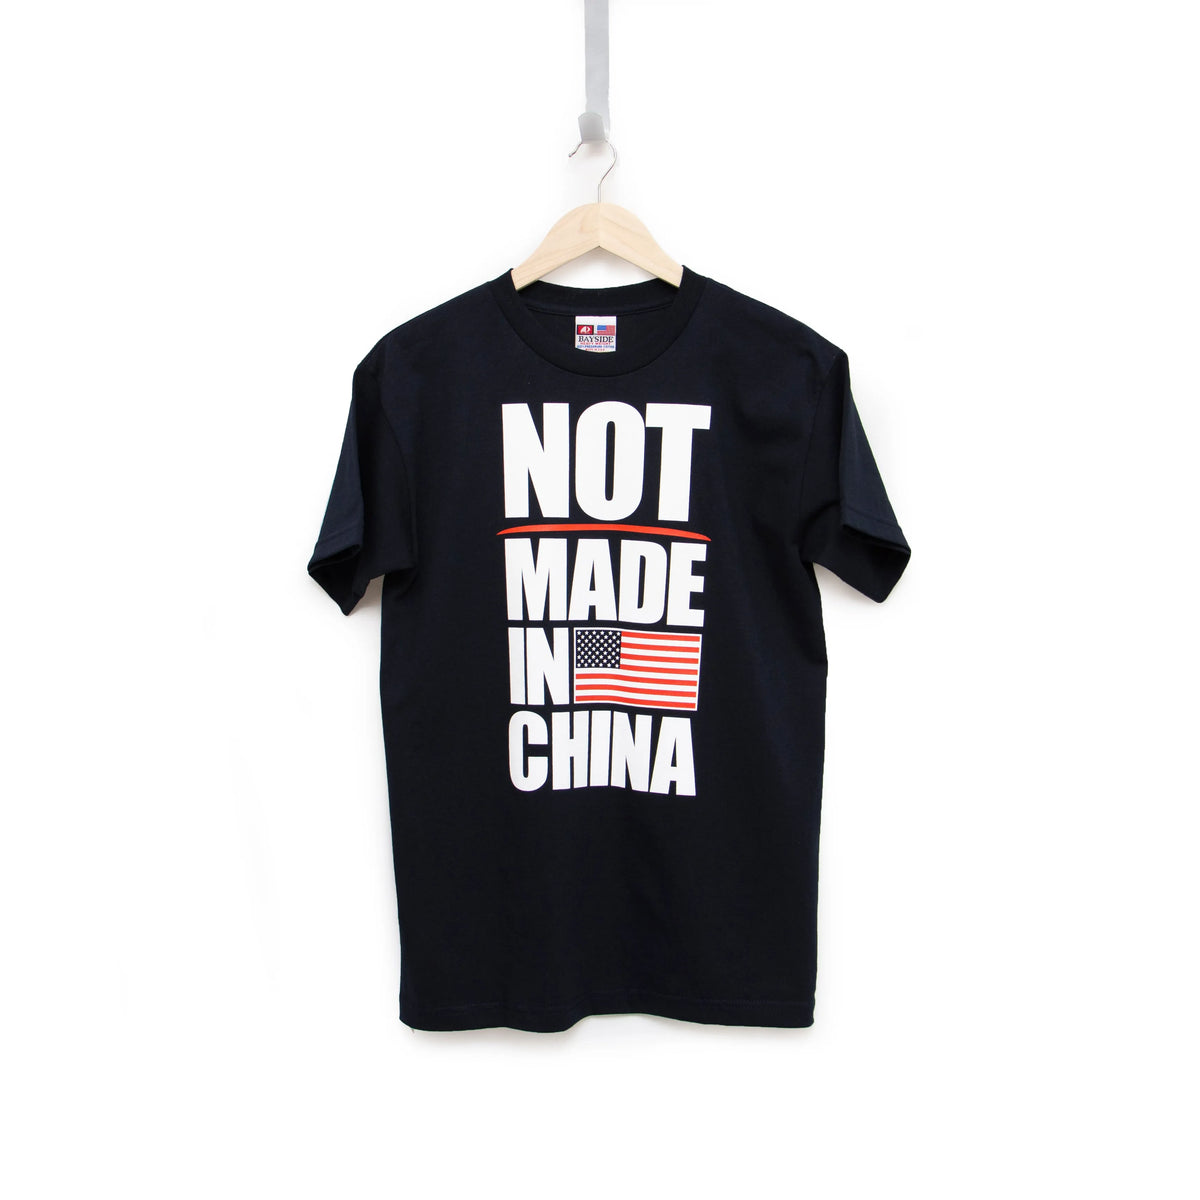 Clothing Brands Not Made in China For Sale All American Clothing Co